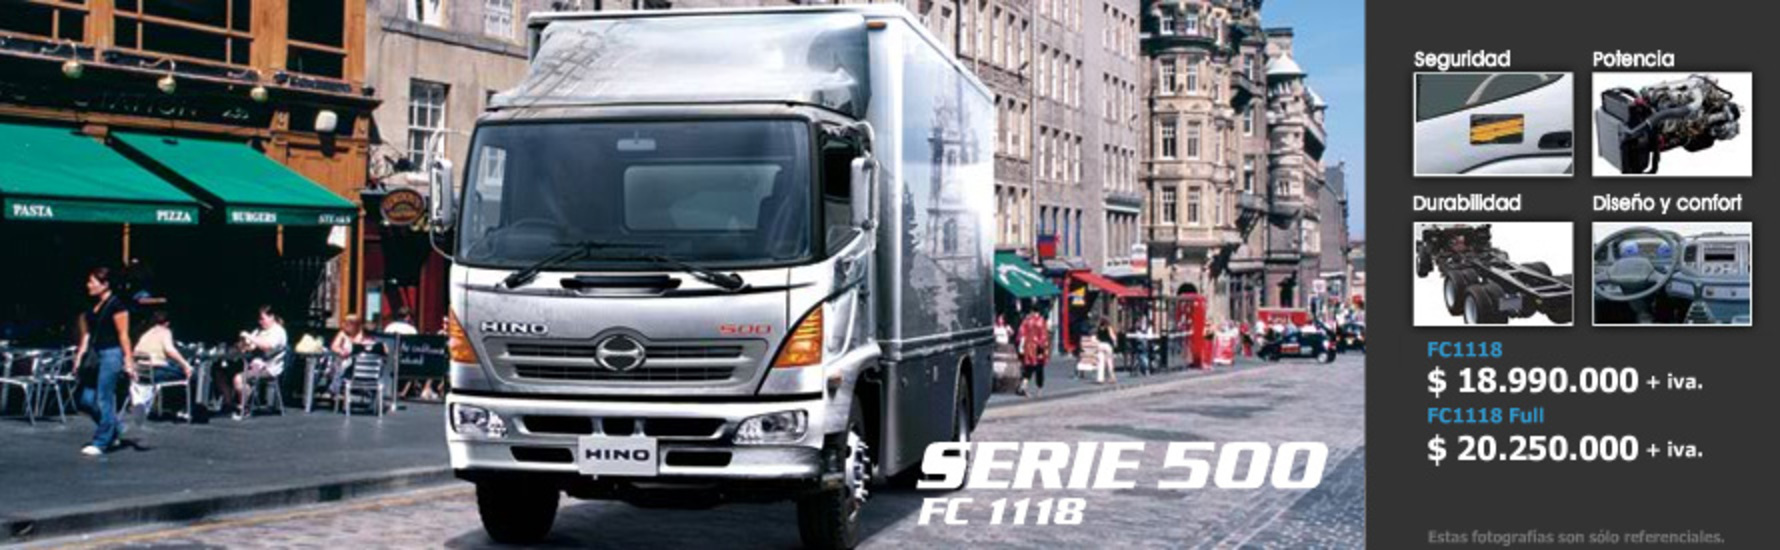 Hino 500 FC 1118 - cars catalog, specs, features, photos, videos, review,